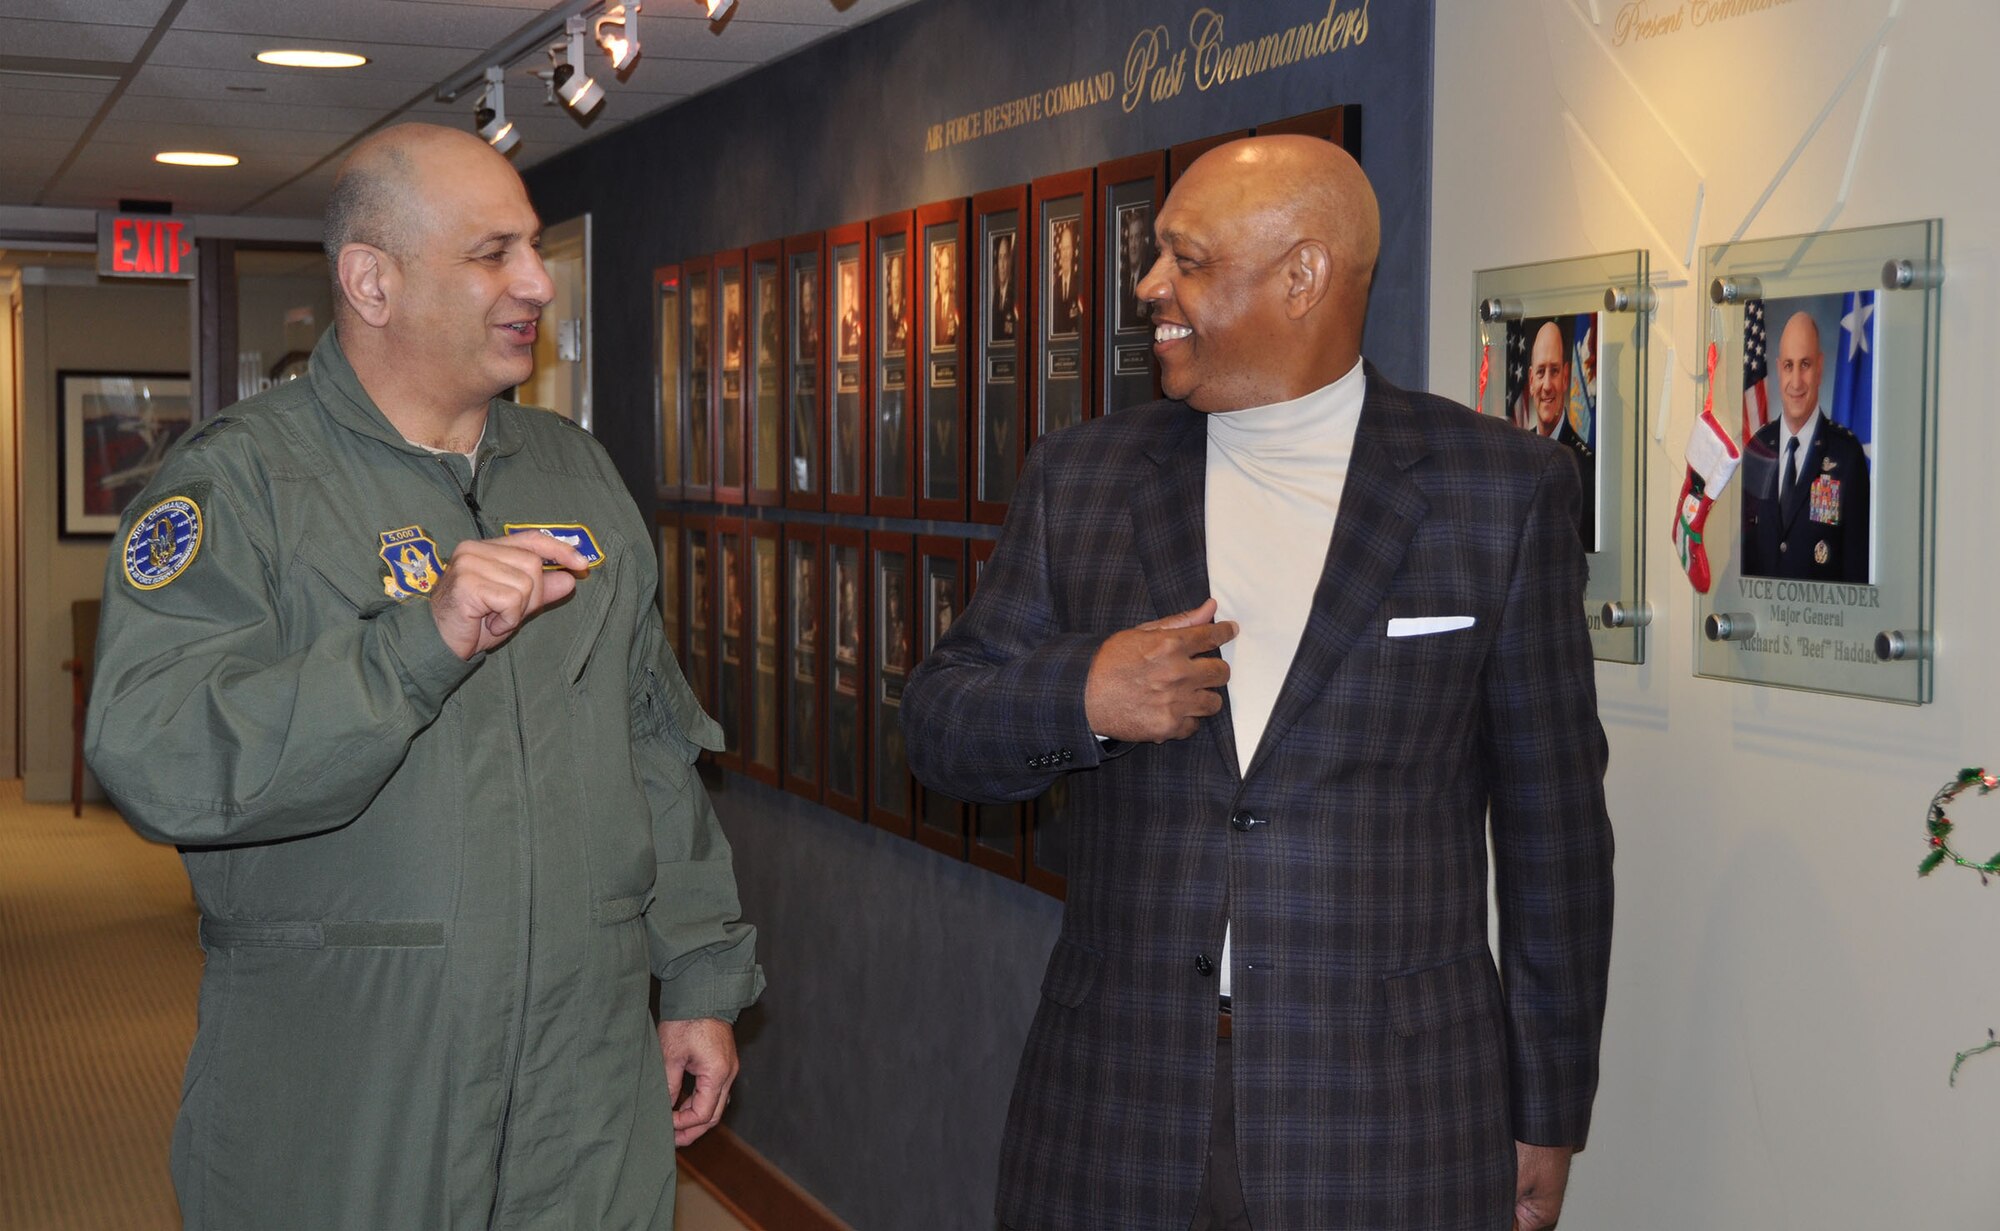 Maj. Gen. Richard S. Haddad, Air Force Reserve Command vice commander and Mr. John Grant, Air Force Reserve Celebration Bowl executive director, take a tour of the headquarters prior to meeting to discuss the upcoming bowl game. The Air Force Reserve will be the title sponsor for the Air Force Reserve Celebration Bowl, slated for Dec. 19 at the Georgia Dome in Atlanta. (Air Force photo/Master Sgt Chance Babin)